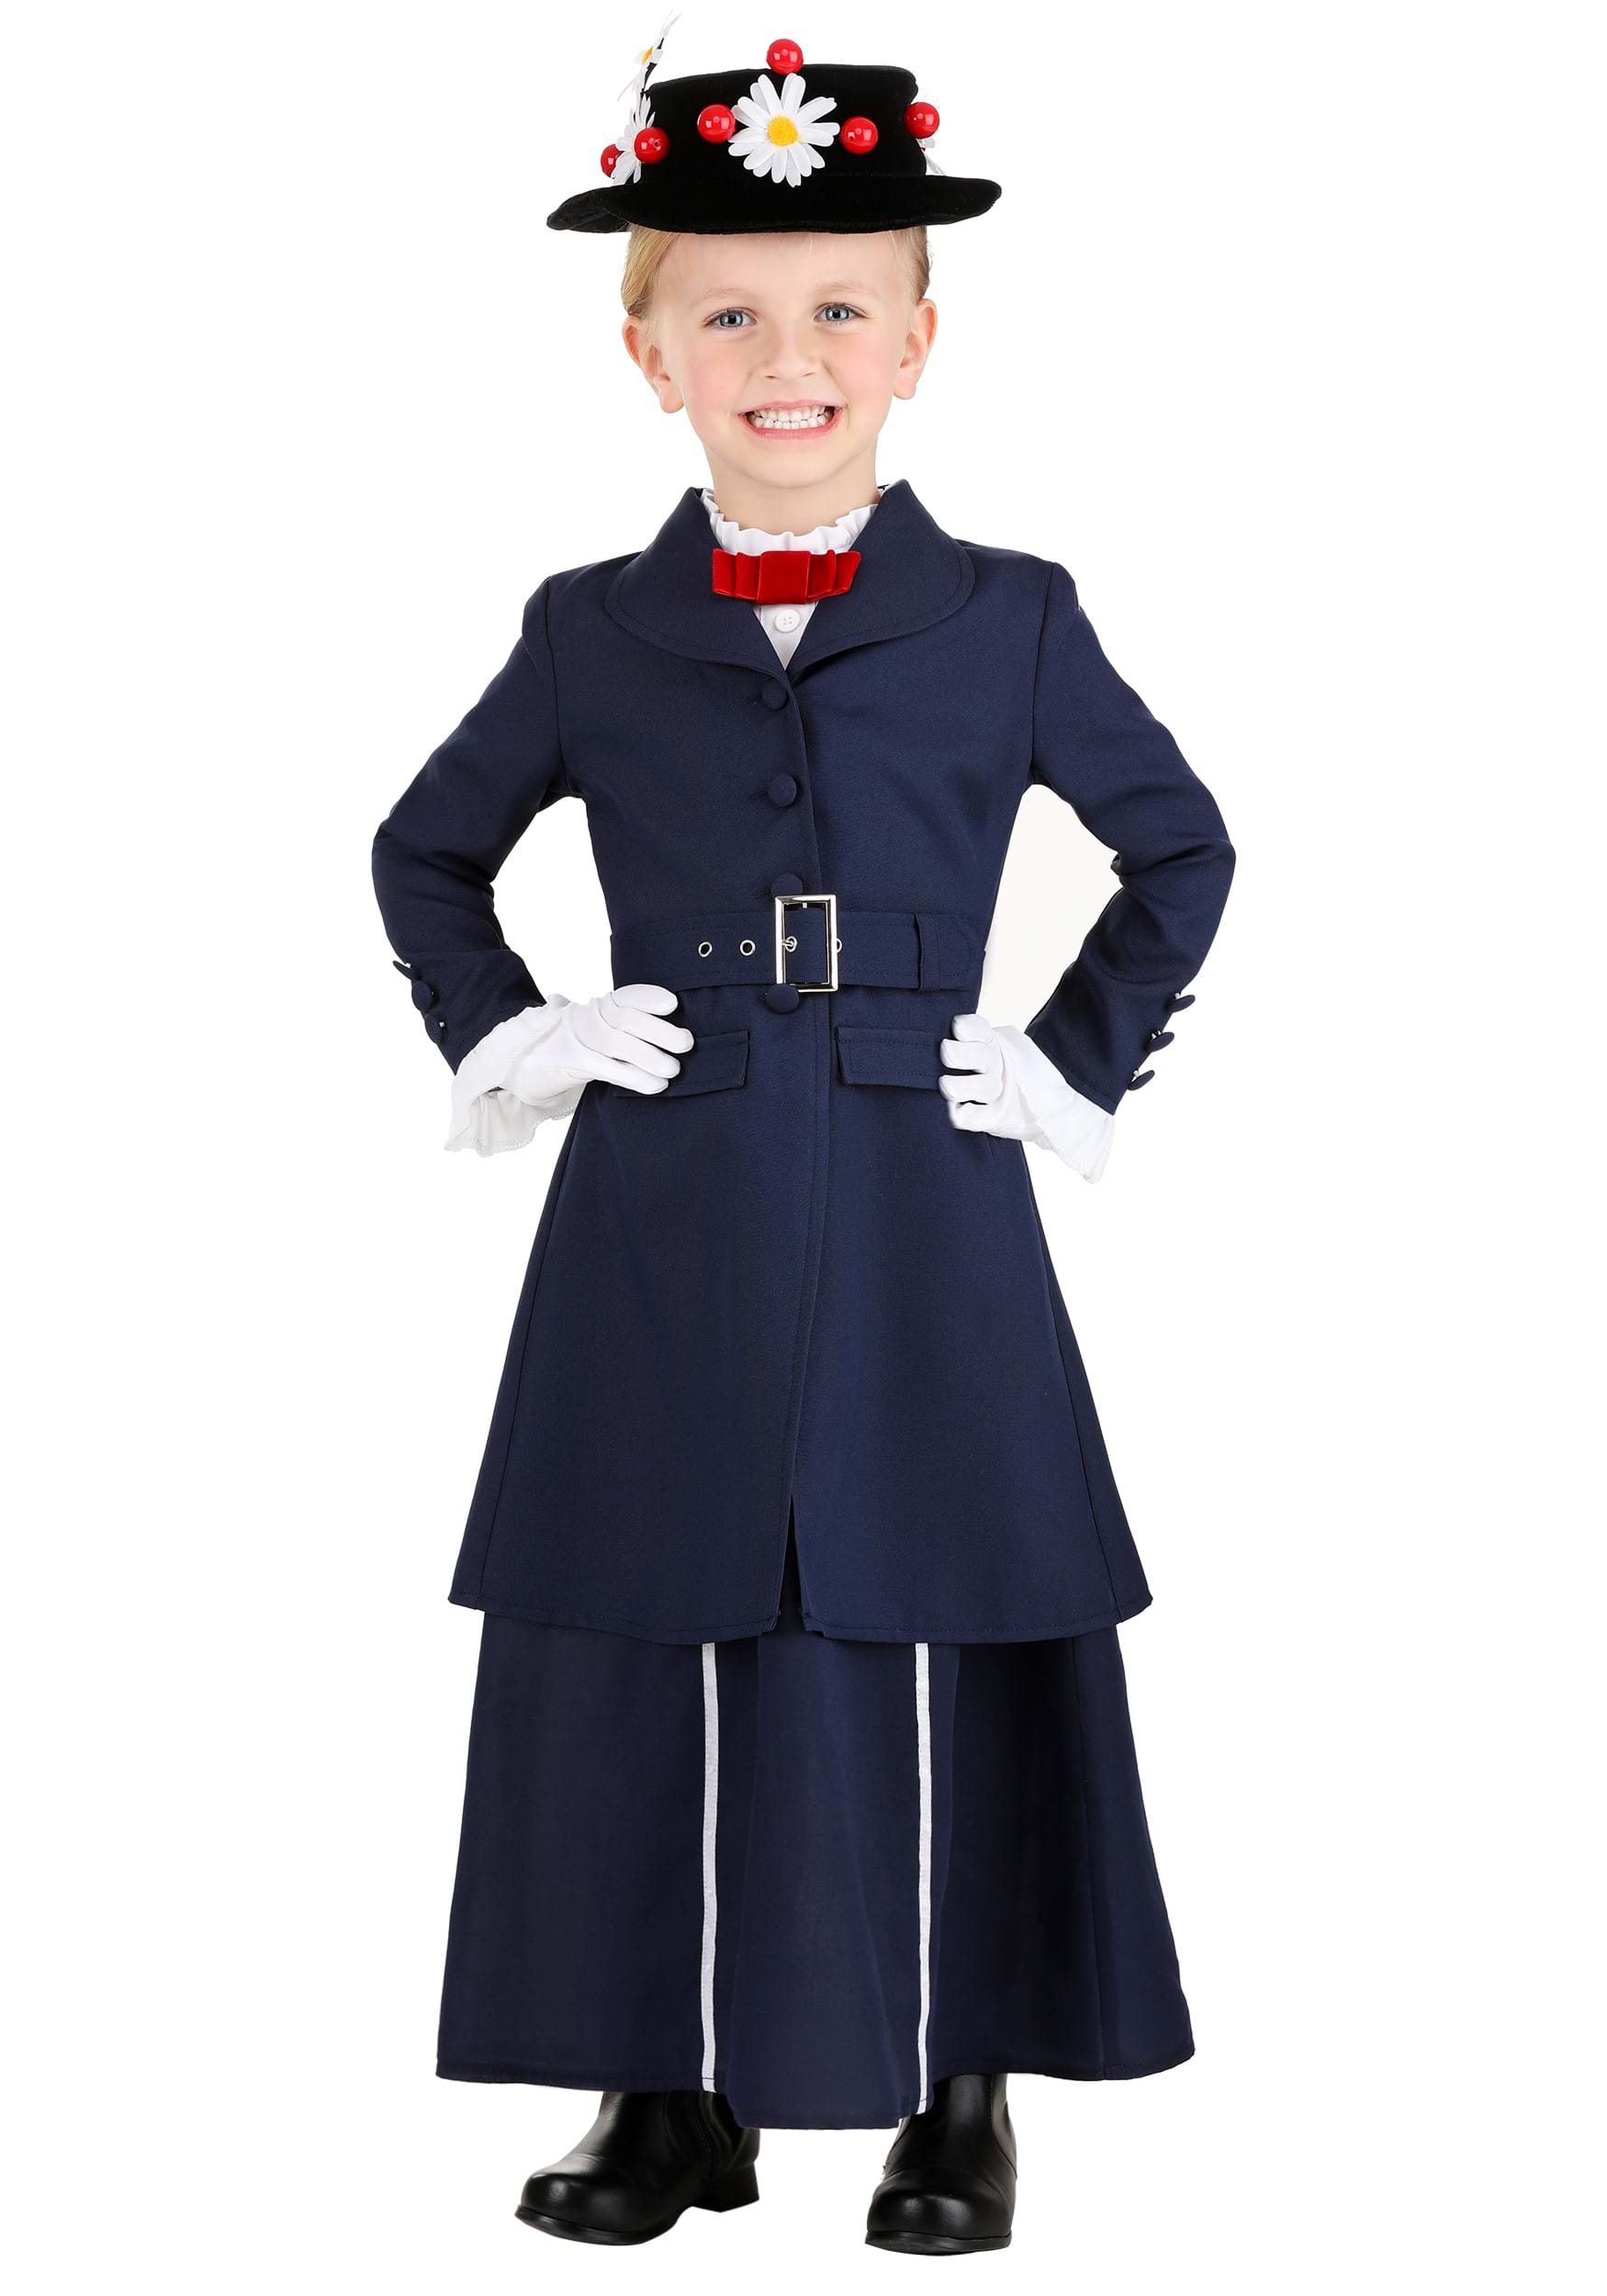 Photos - Fancy Dress Disney FUN Costumes Mary Poppins Costume for Toddlers Blue/Red/White FUN2 